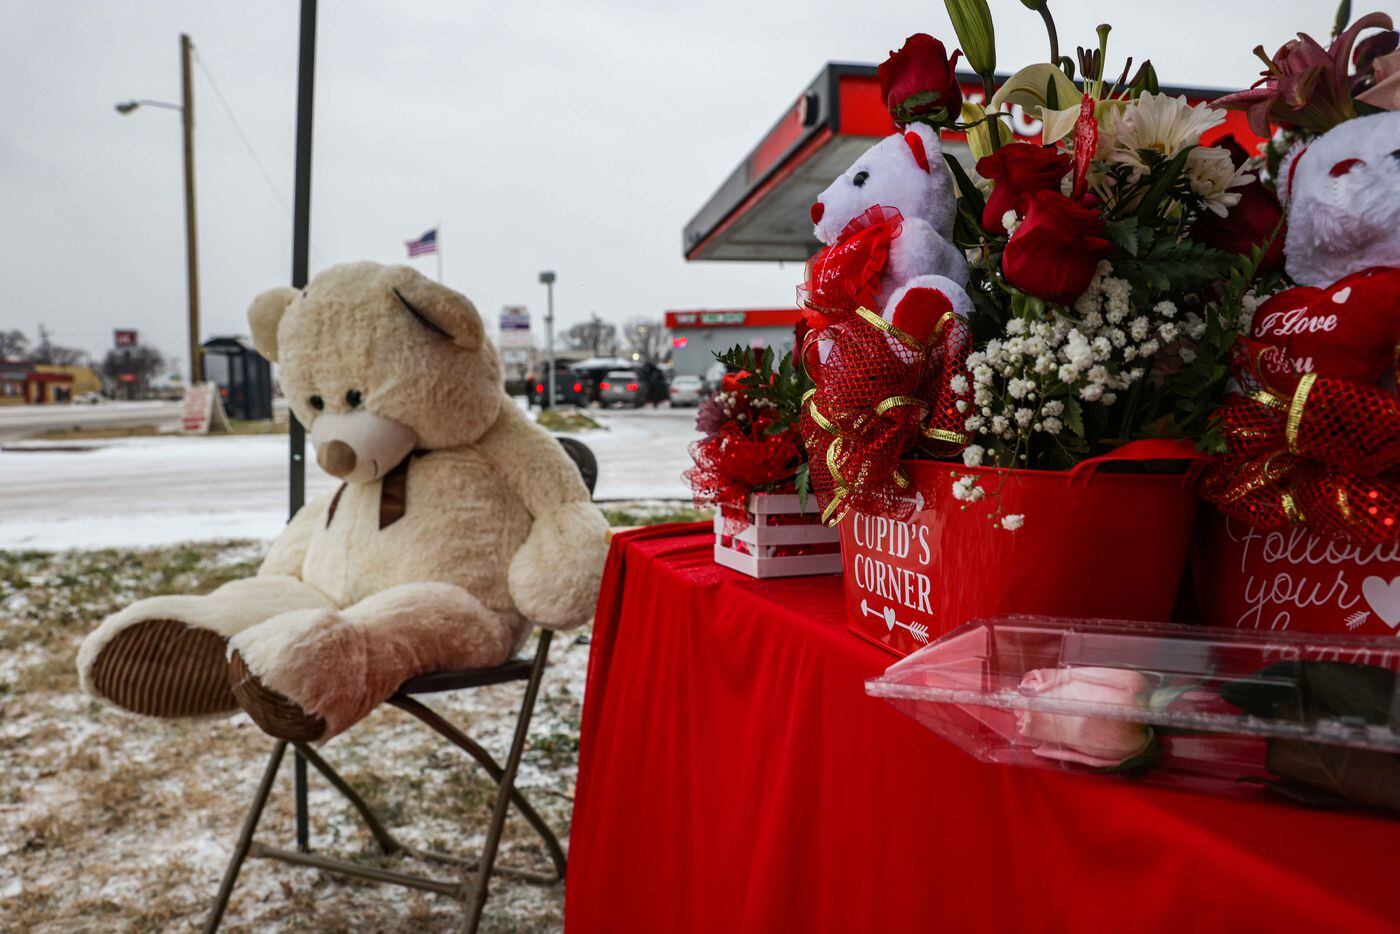 At the corner of Community Drive and TX-12 Loop Northwest Maria Olvera and Amparo Mejias have a stall selling floral decorations for Valentine's Day in Dallas on Sunday, Februaryn 24, 2021. Olvera said that due to the snowstorm, sales have been low.